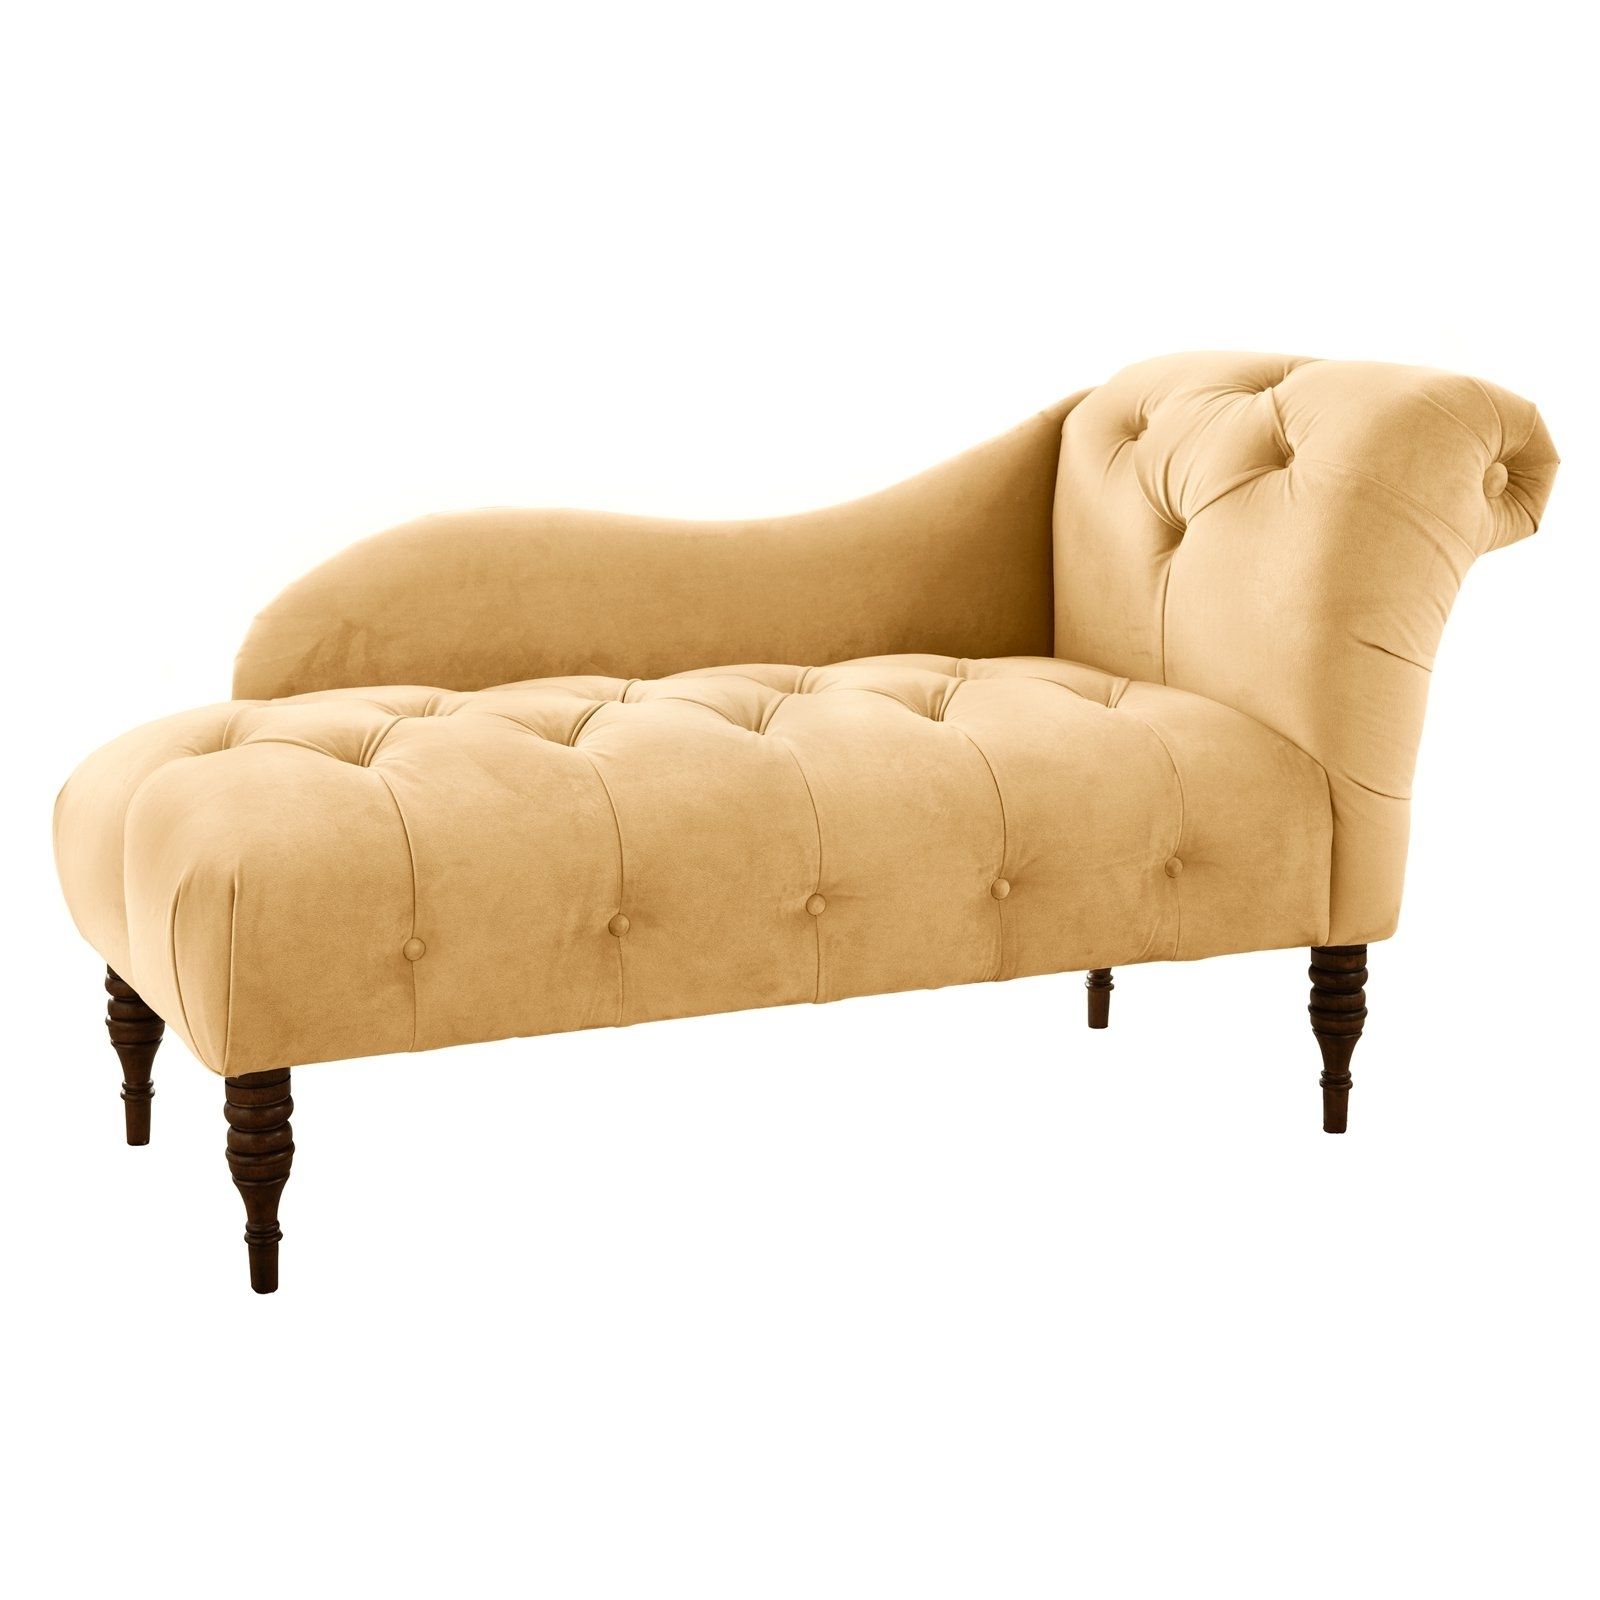 Hayneedle With Regard To Most Up To Date Upholstered Chaise Lounge Chairs (View 11 of 15)